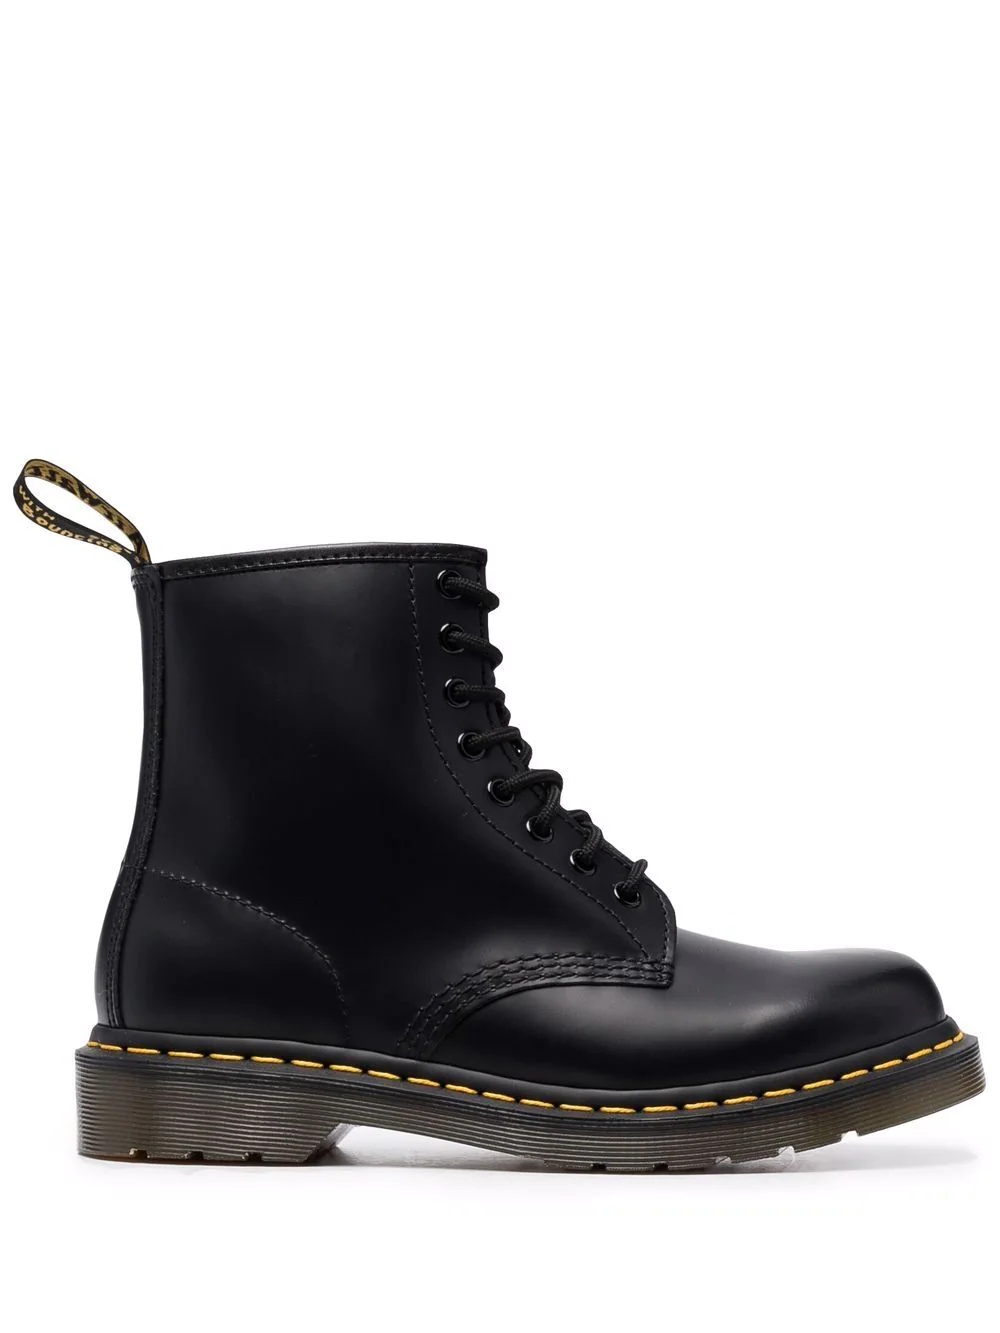 DR. MARTENS 1460 Smooth Leather Lace Up Boots - 1